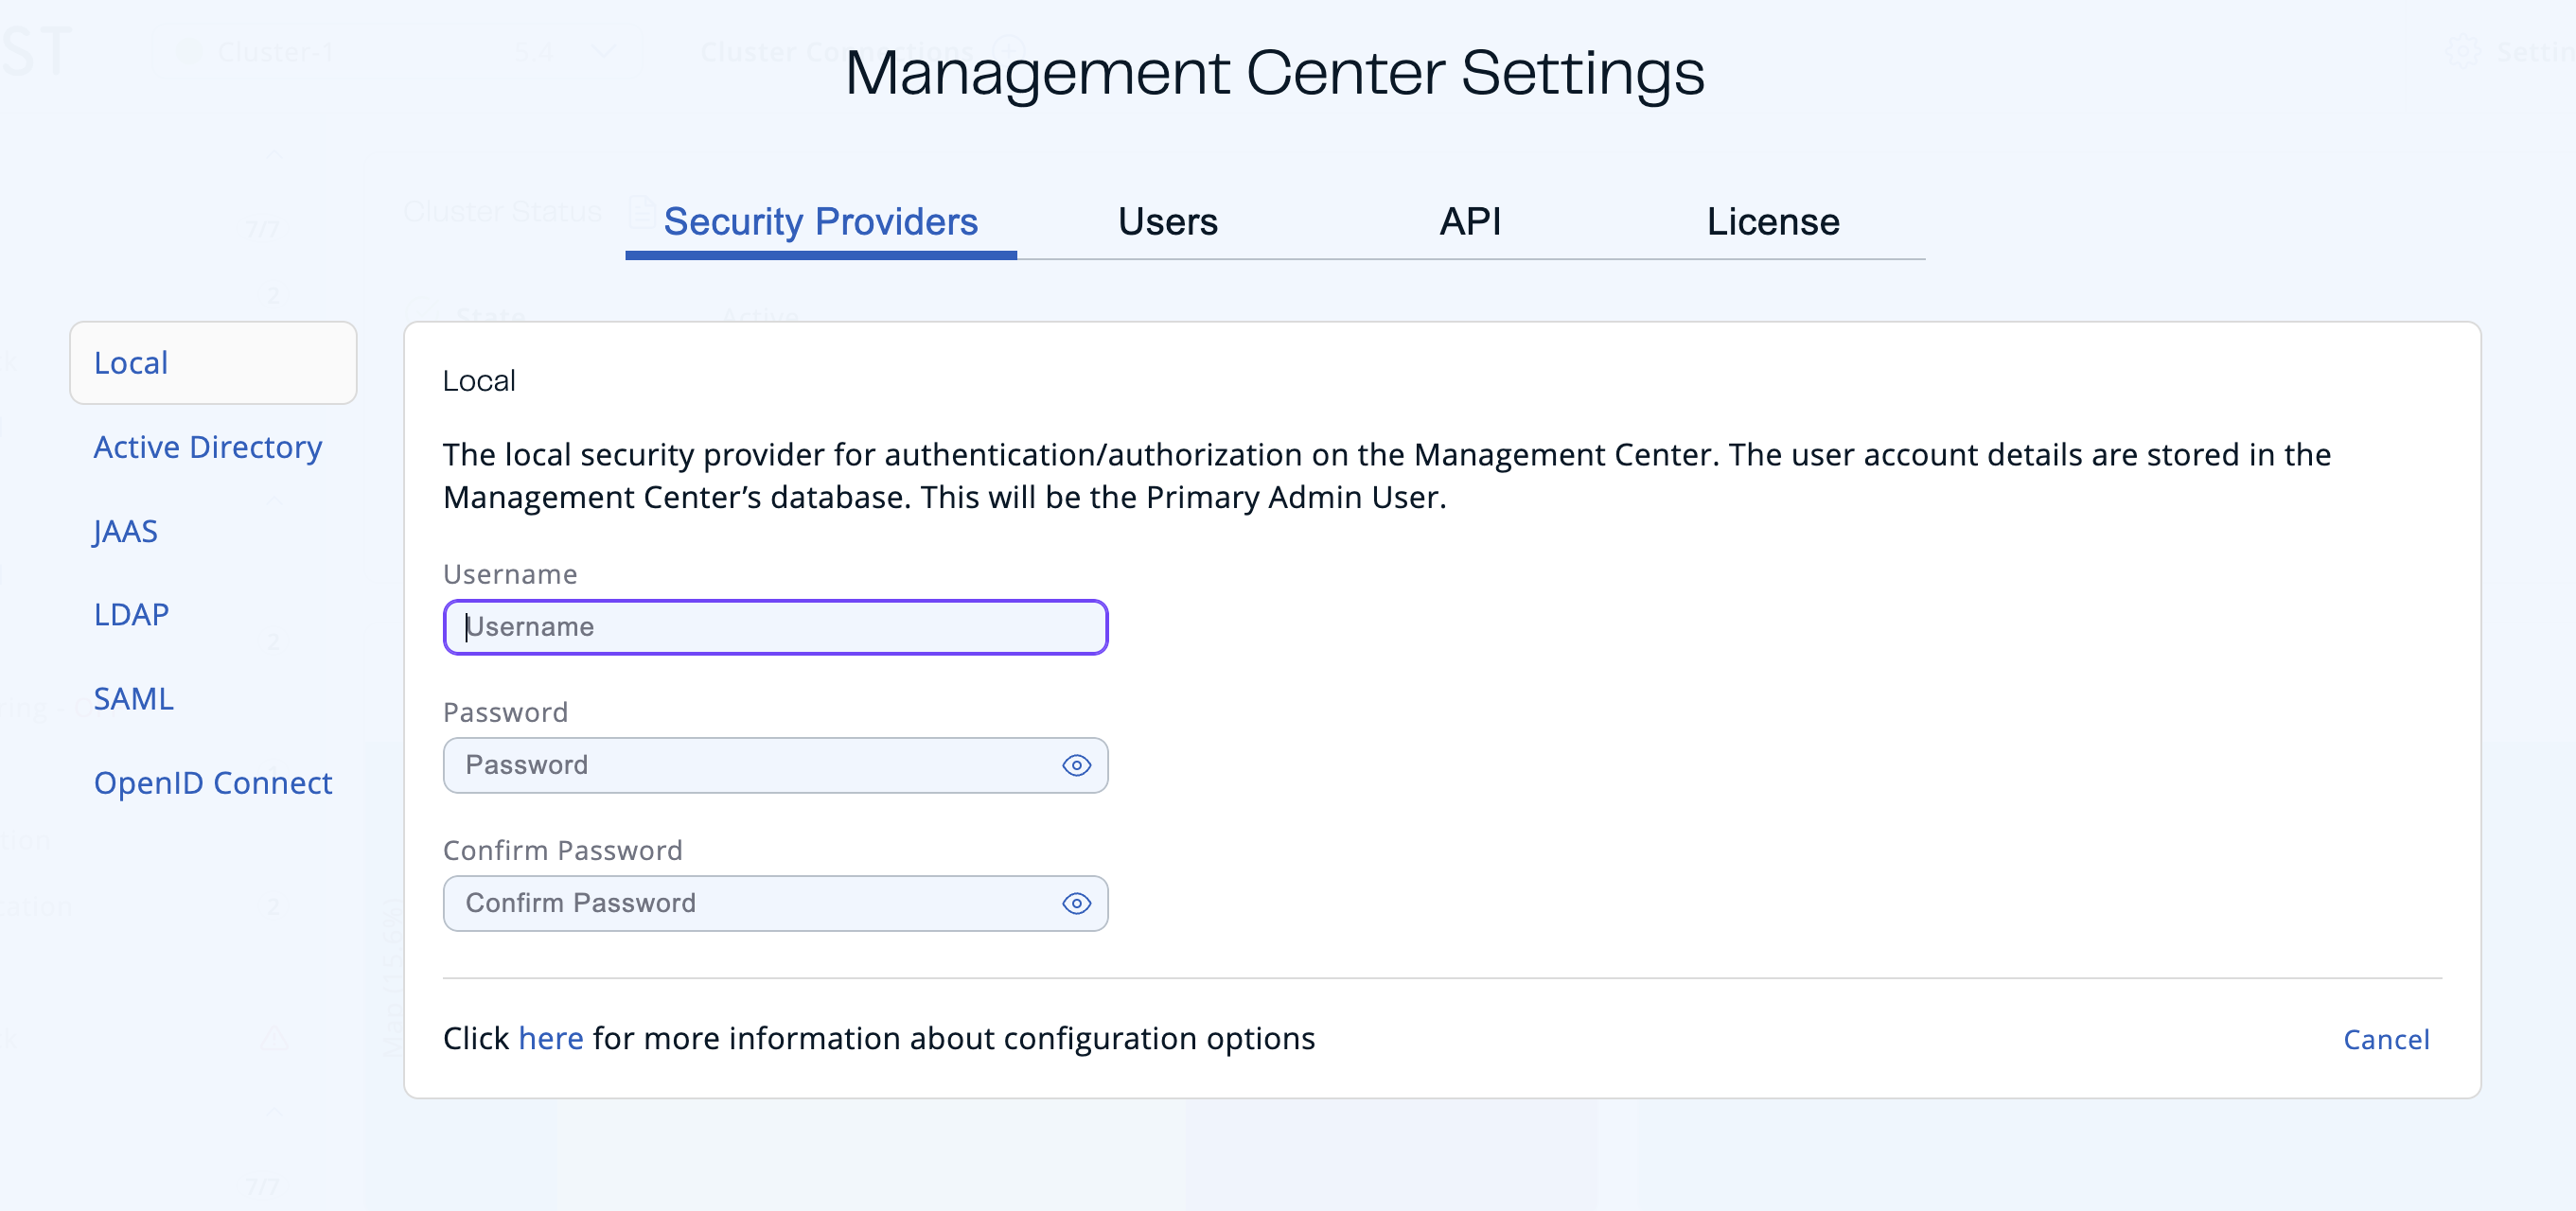 Security Providers tab in Management Center settings